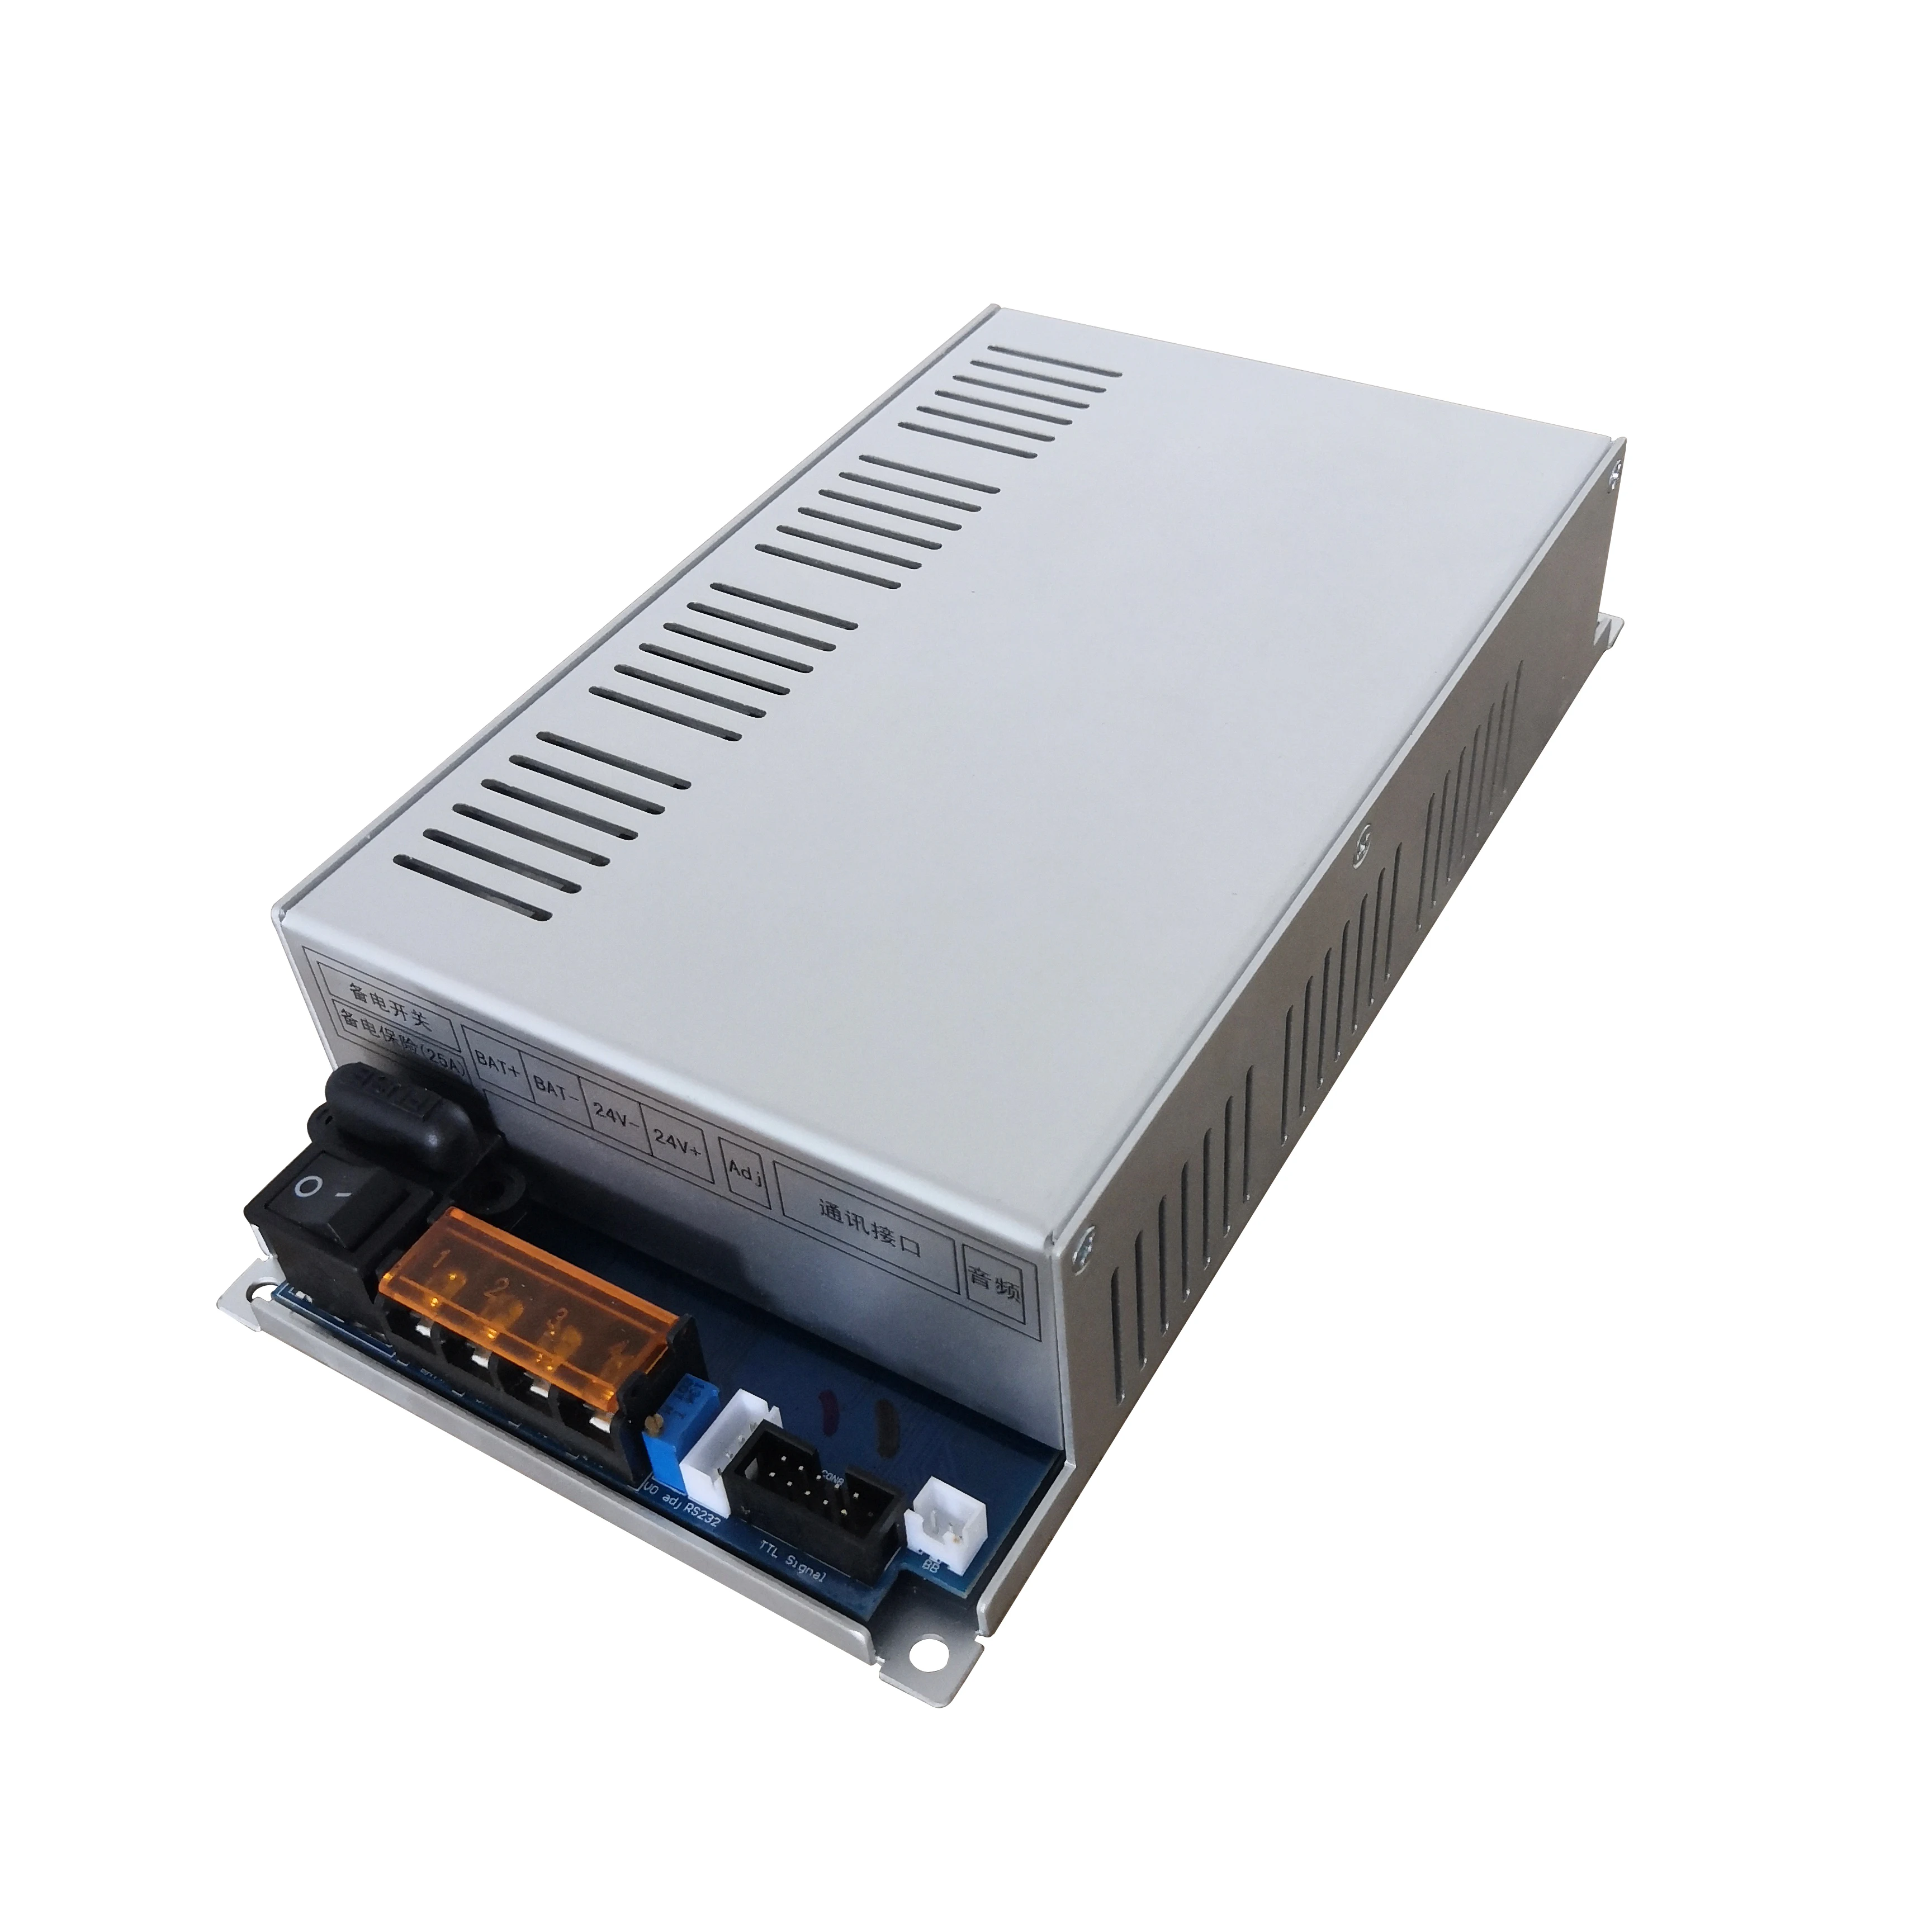 300W ups power supply Battery Back Up Switching Power SPS with UPS function